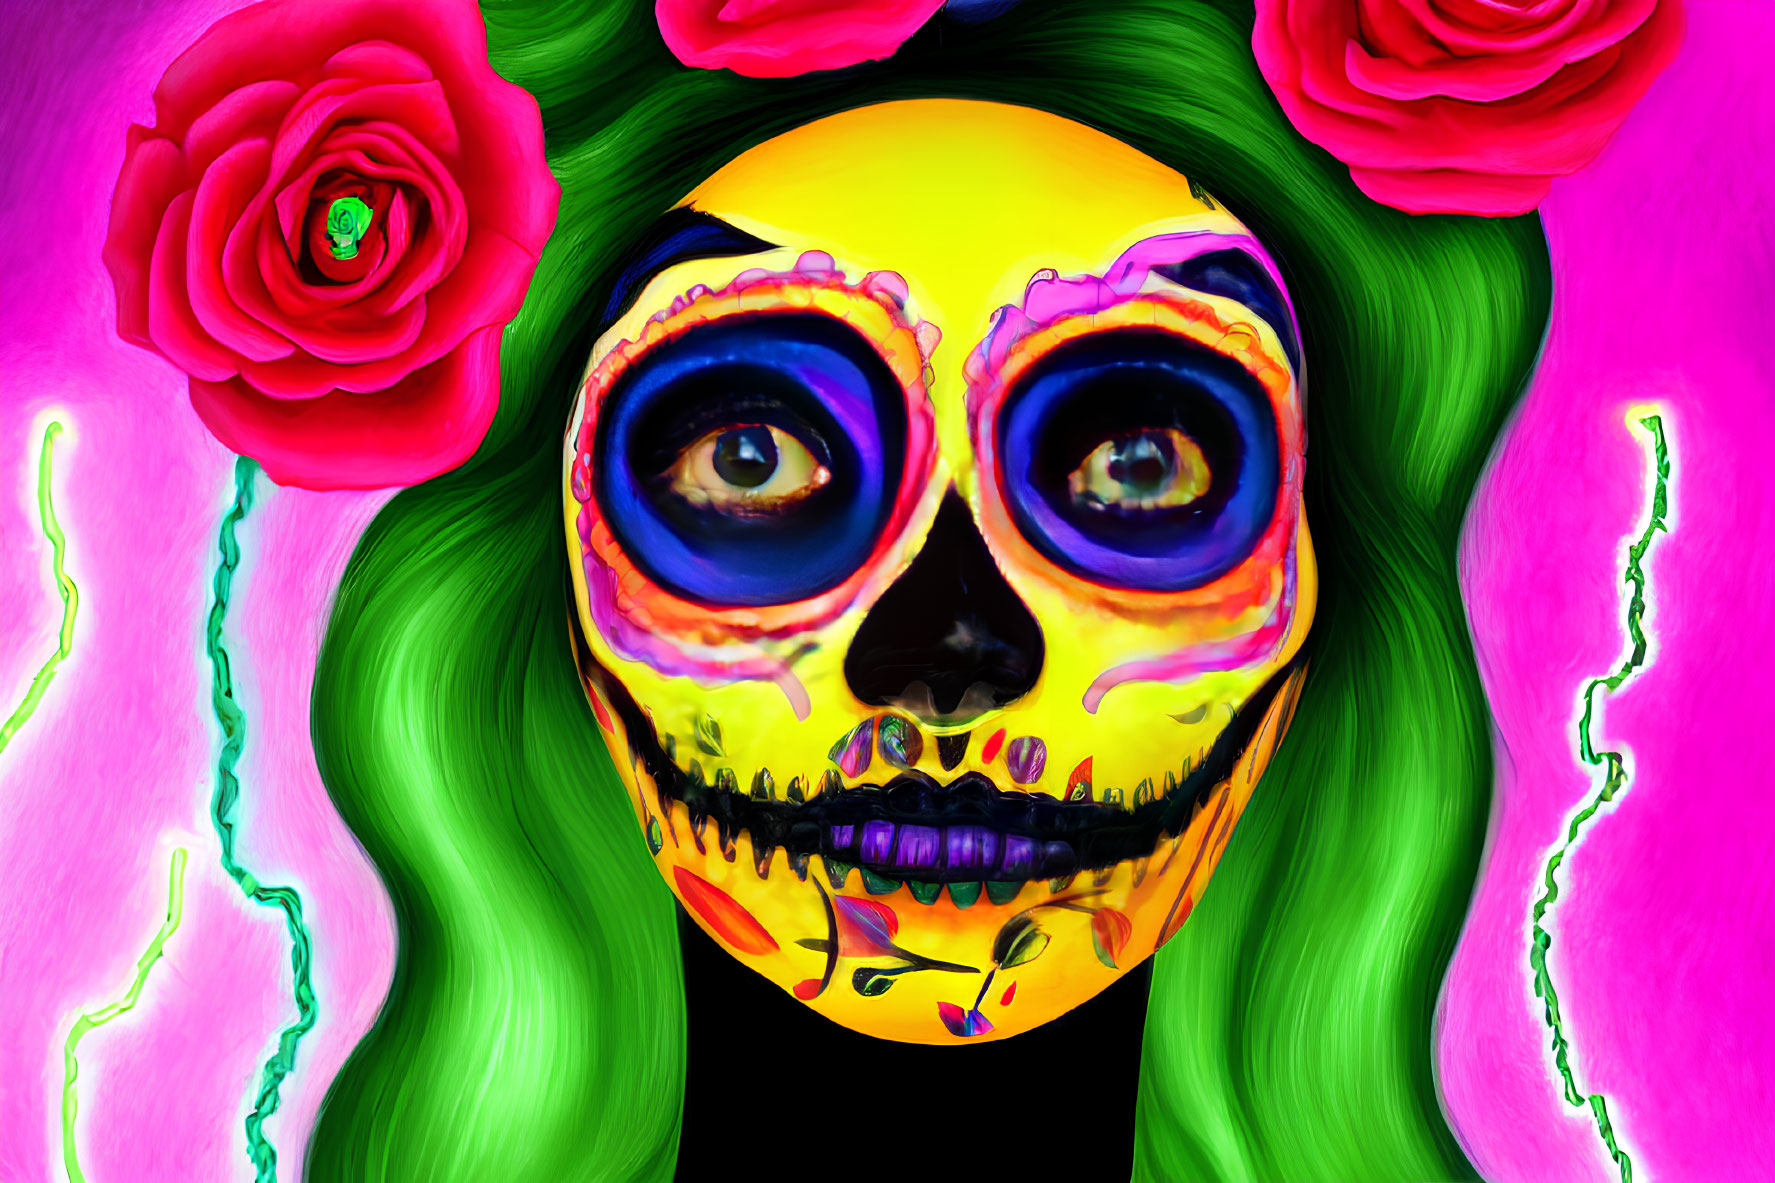 Colorful Day of the Dead makeup with skull design and roses on vibrant background